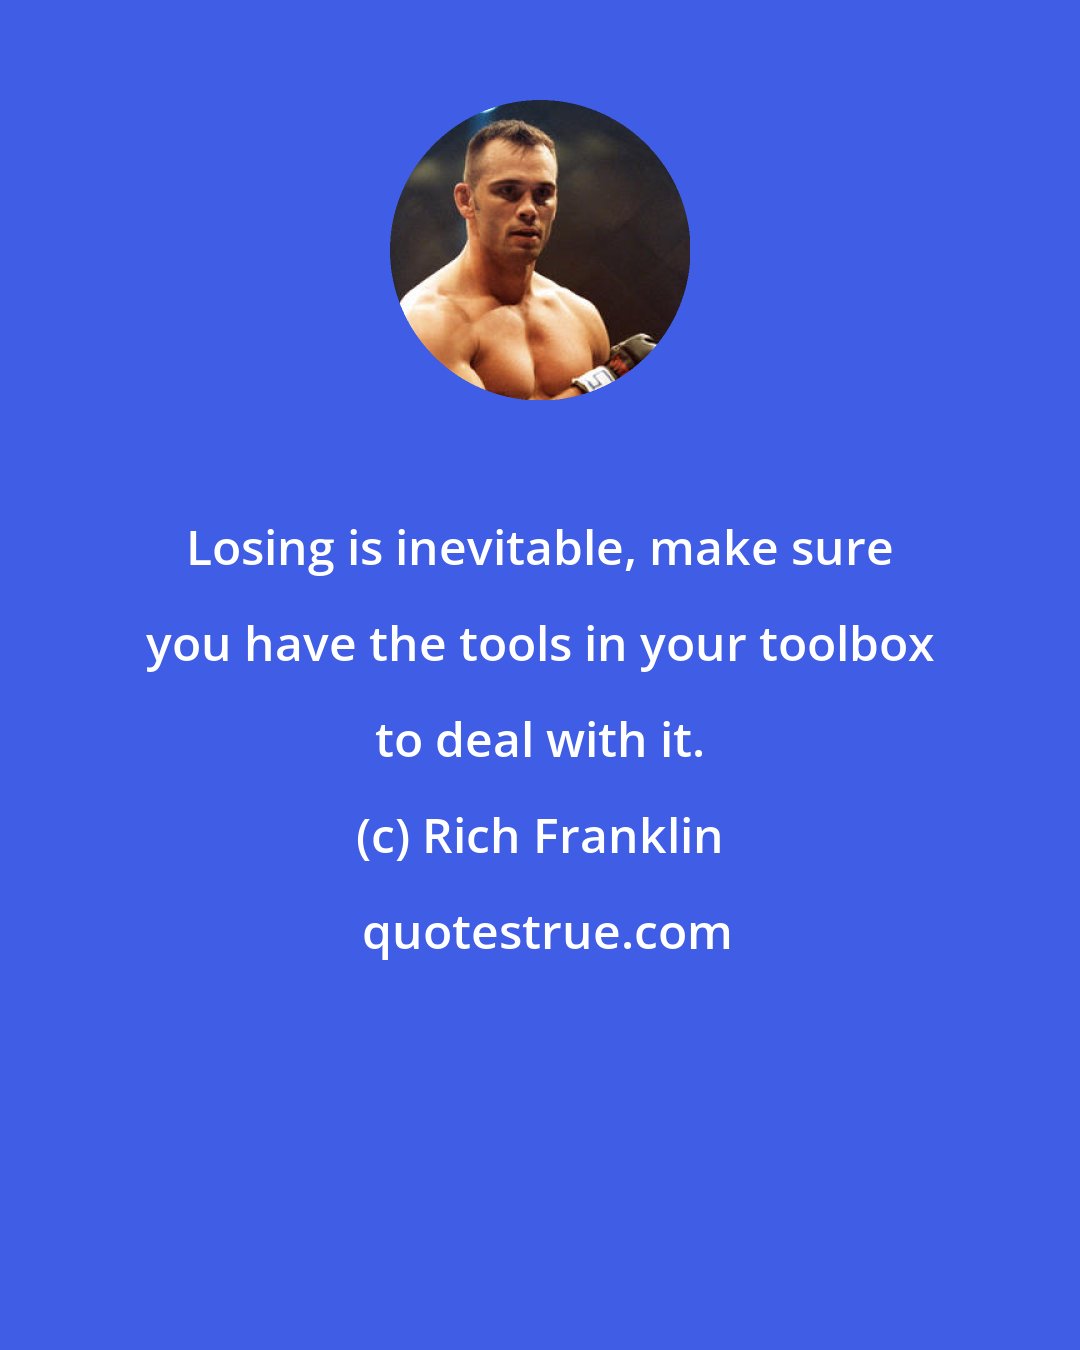 Rich Franklin: Losing is inevitable, make sure you have the tools in your toolbox to deal with it.